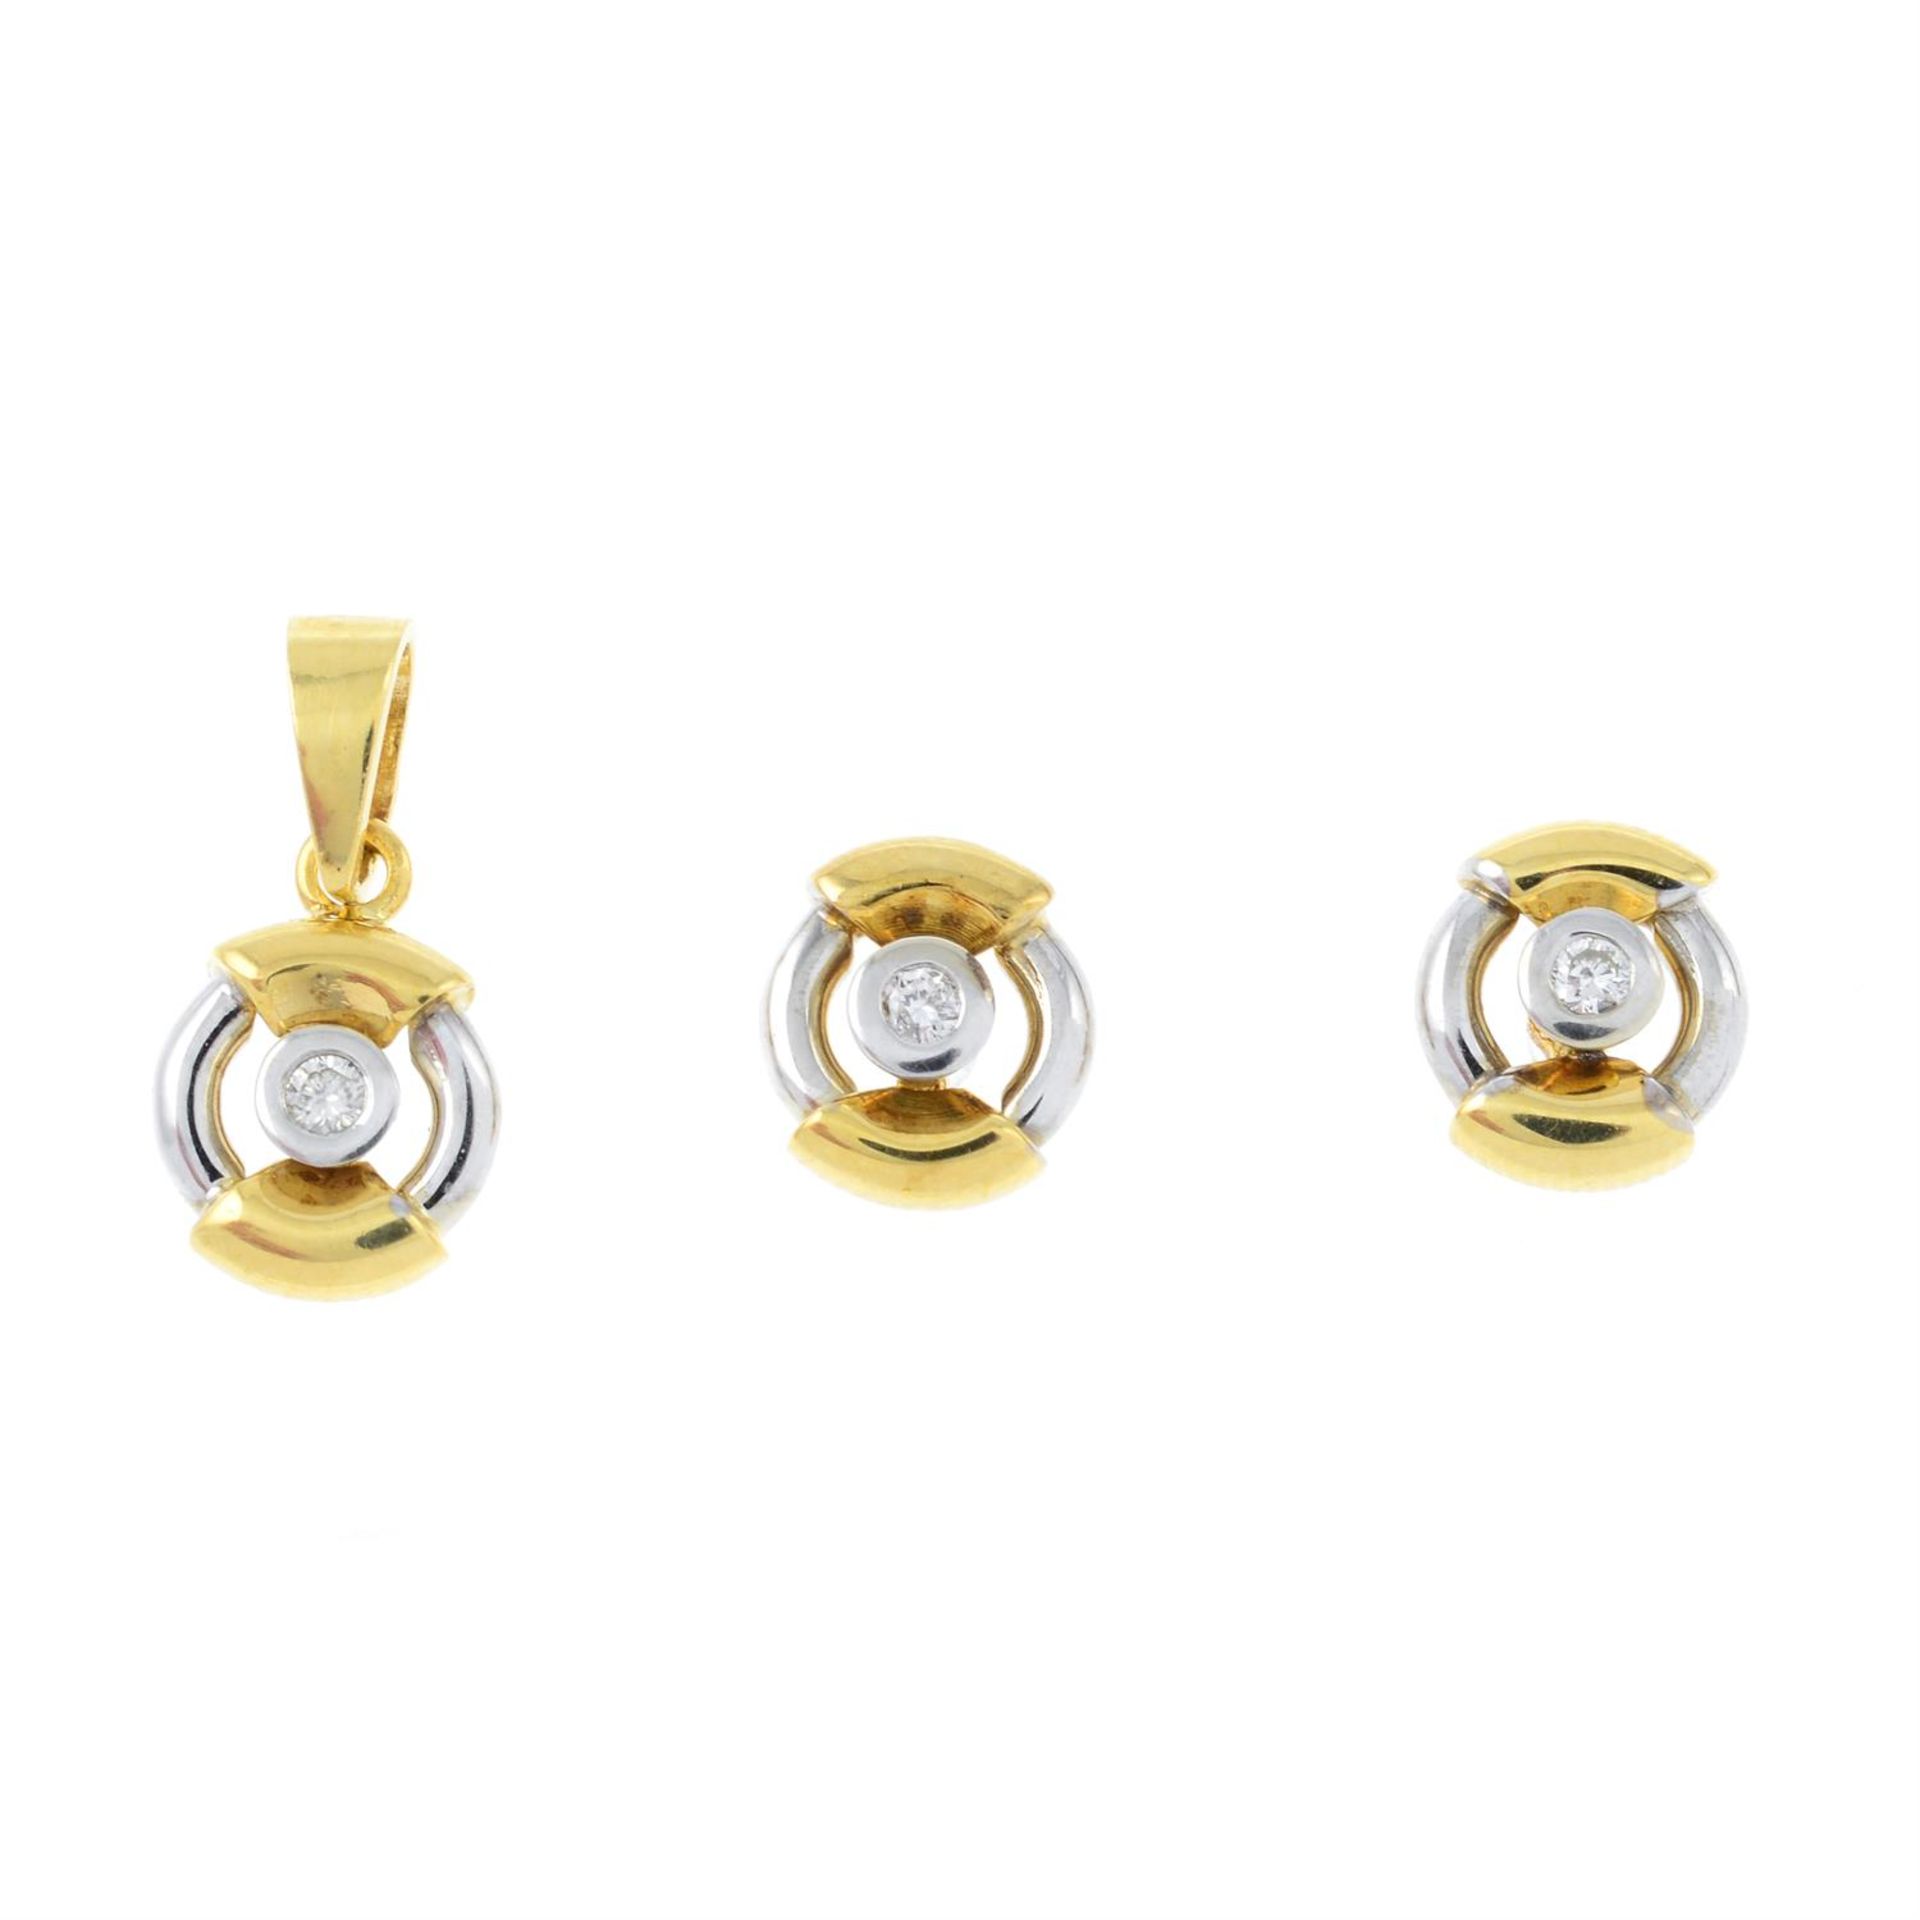 An 18ct gold diamond bi-colour pendant, together with a matching pair of earrings.